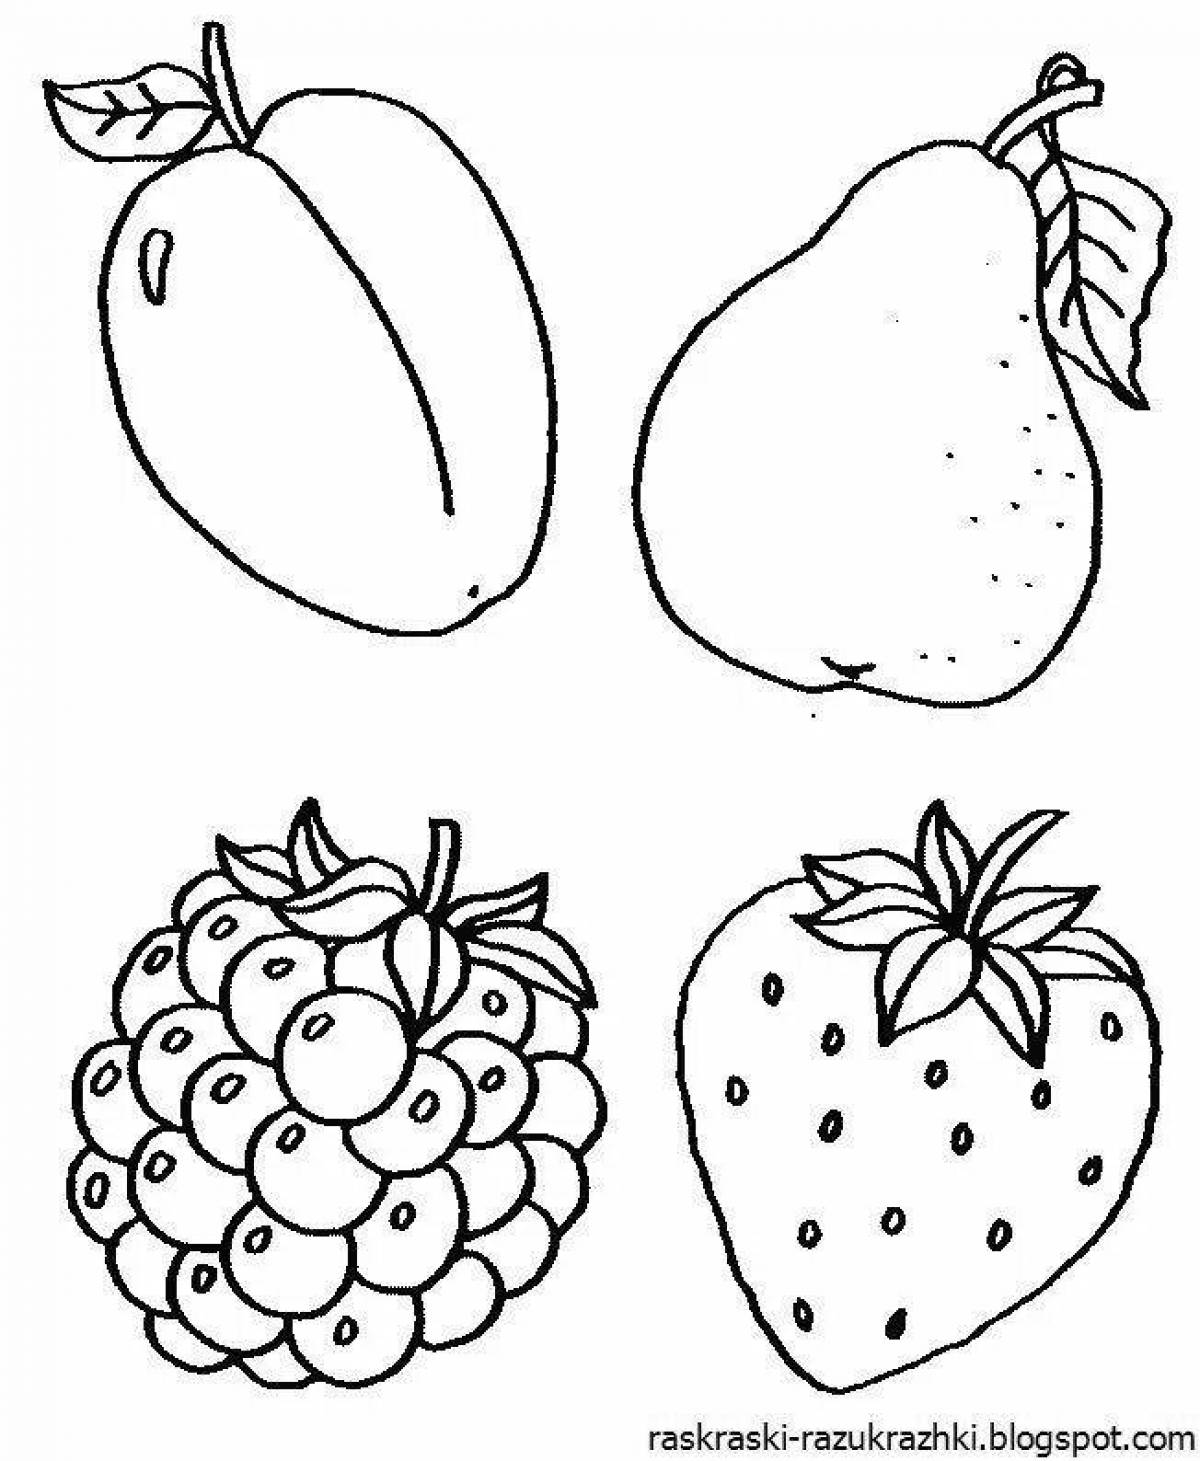 Juicy fruit and vegetable coloring pages